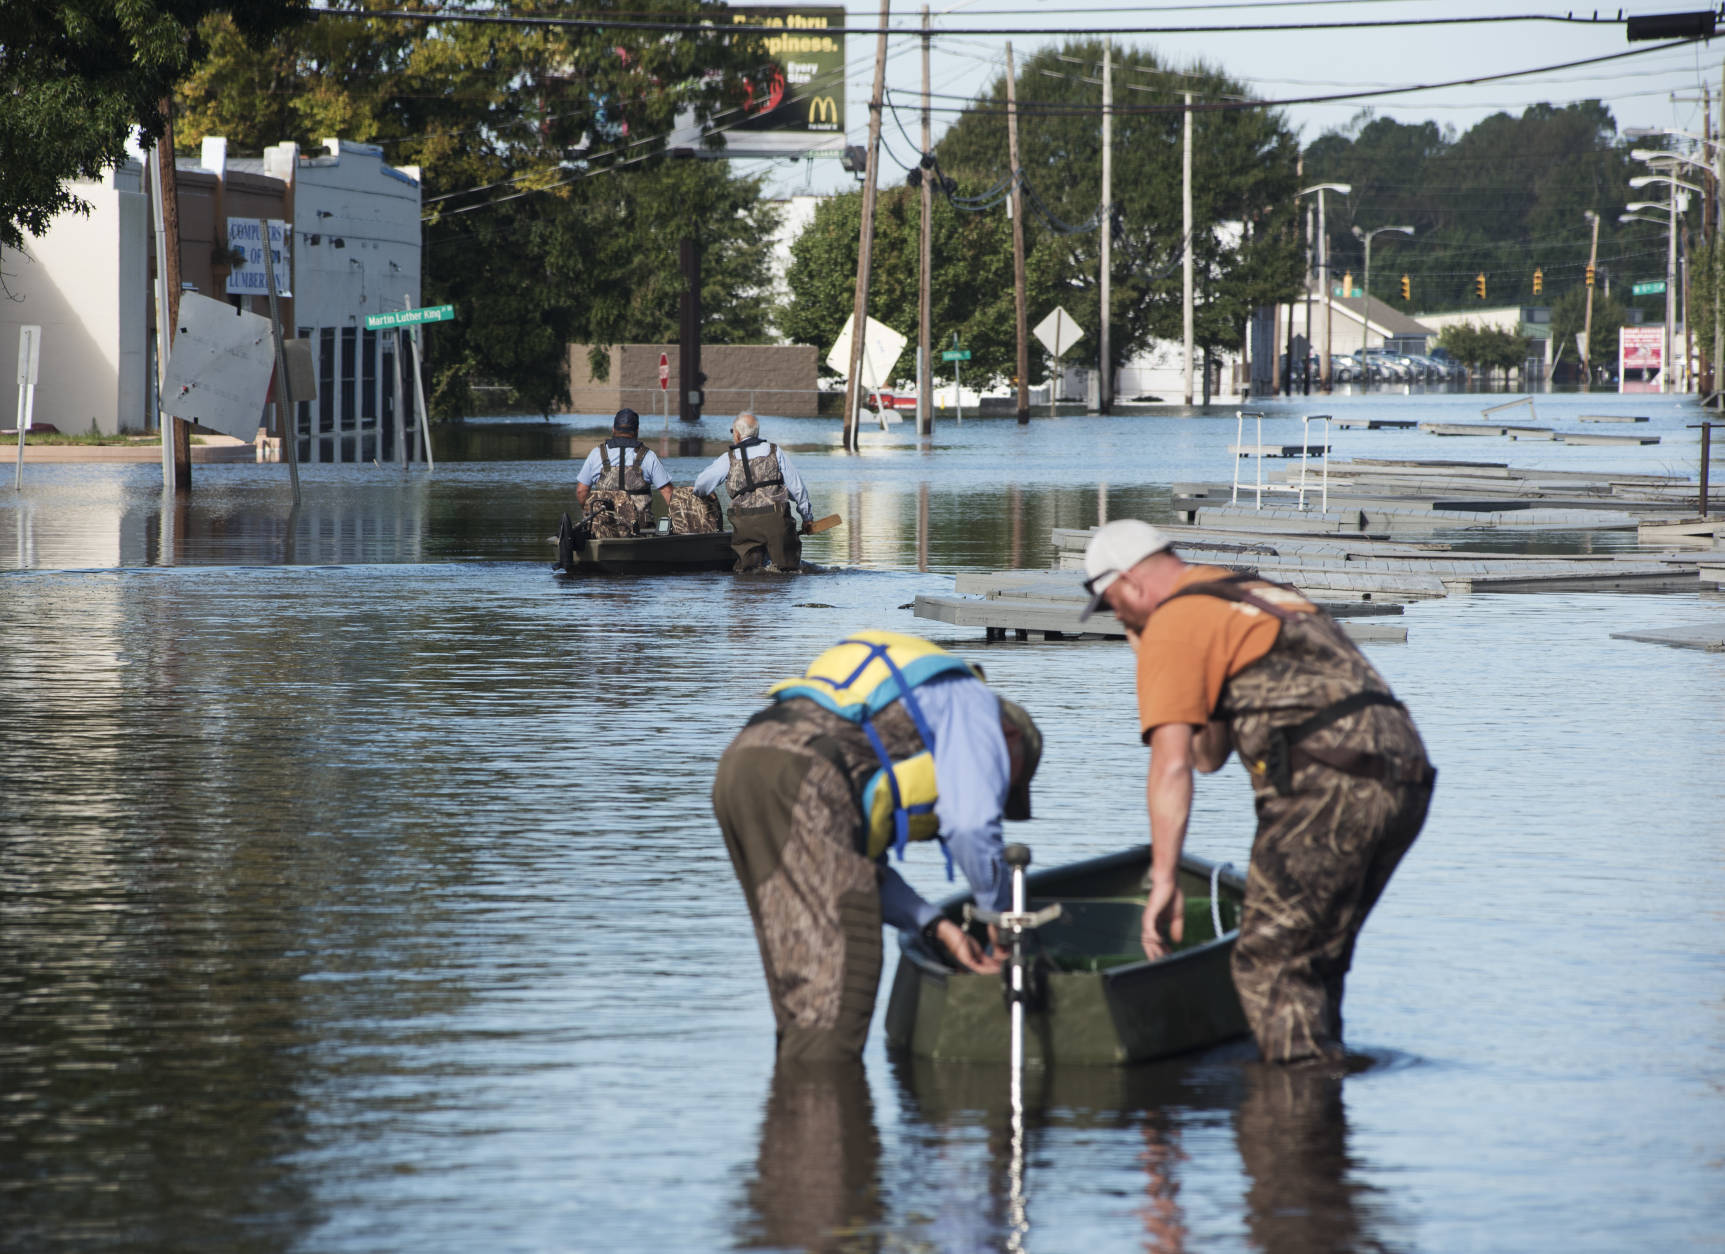 Workers with the City of Lumberton use boats to travel down West 5th Street to the city's water treatment plant through floodwaters caused by rain from Hurricane in Lumberton, N.C., Wednesday, Oct. 12, 2016. (AP Photo/Mike Spencer)